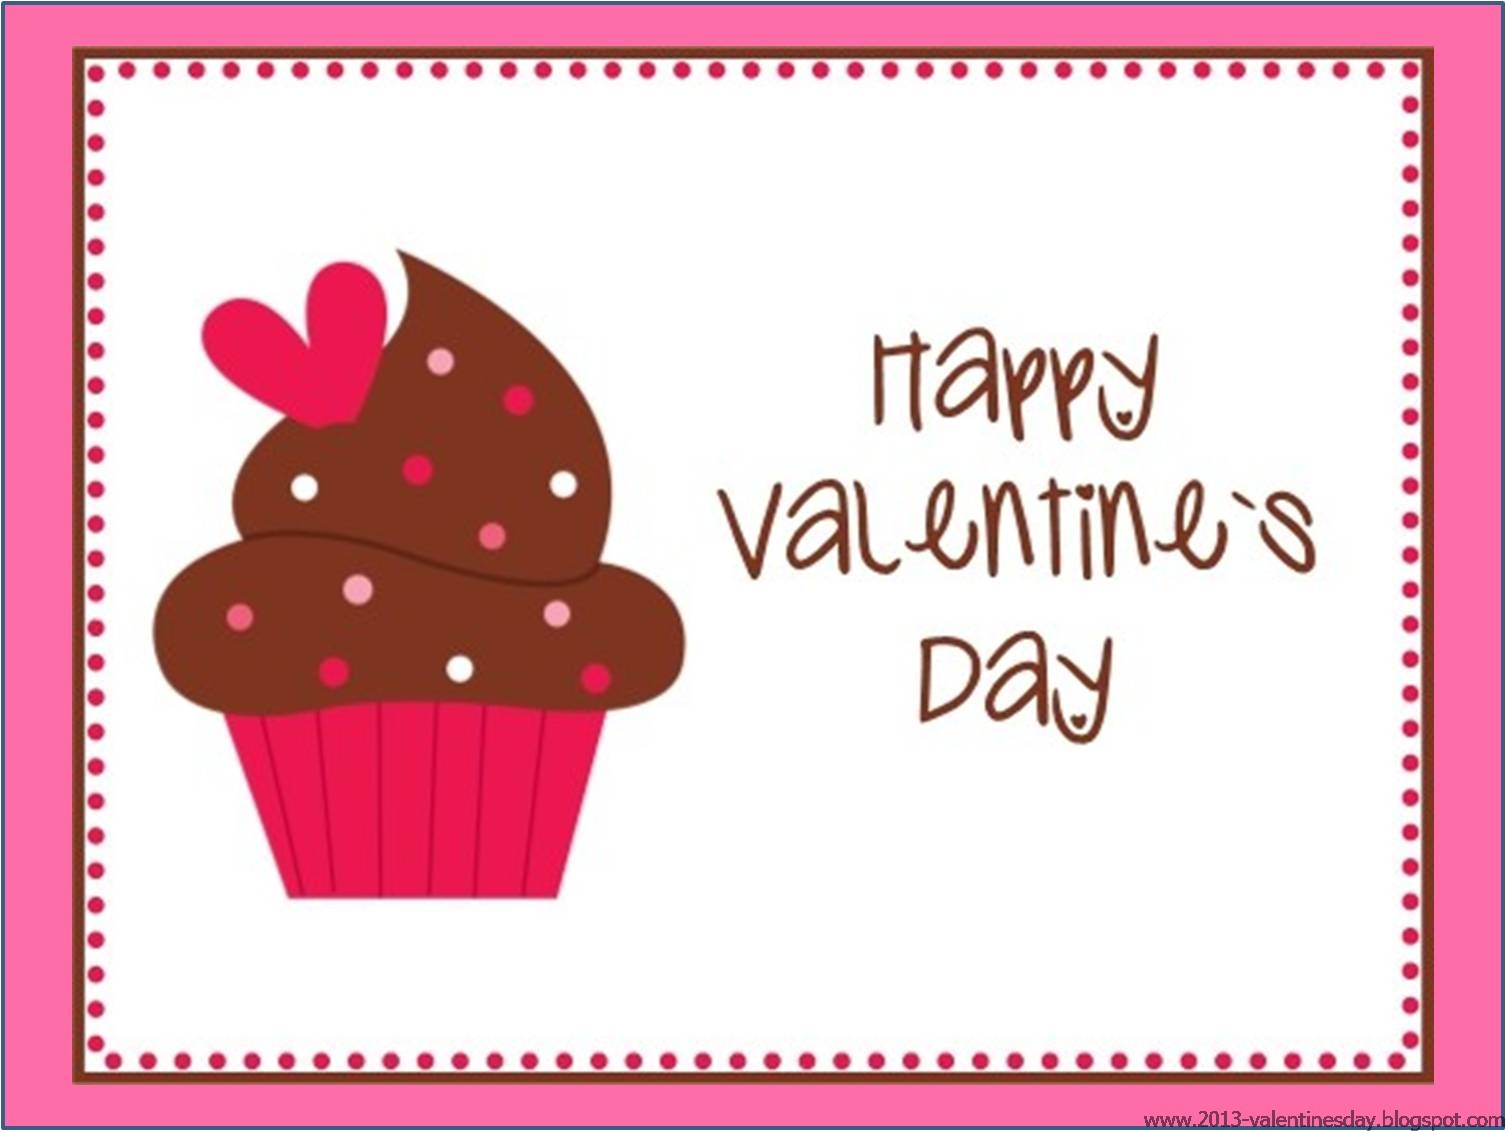 valentines day cupcakes clipart - Clip Art Library.